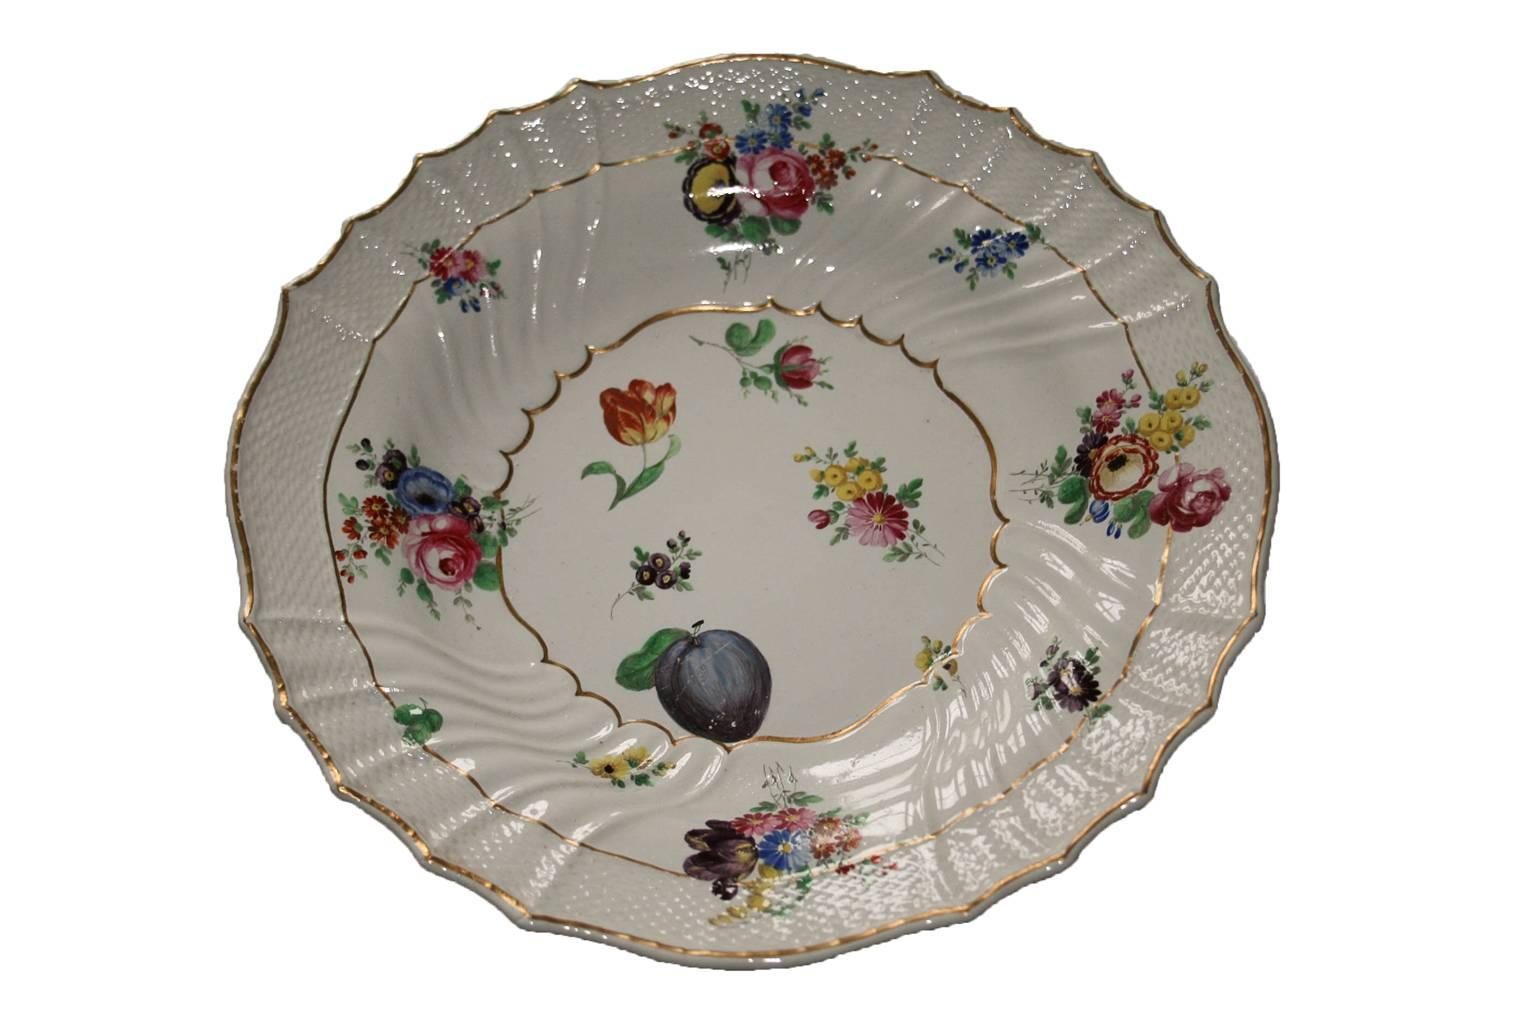 Italy Richard Ginori Mid-18th Century Porcelain Set 8 Dishes Floral Design For Sale 1